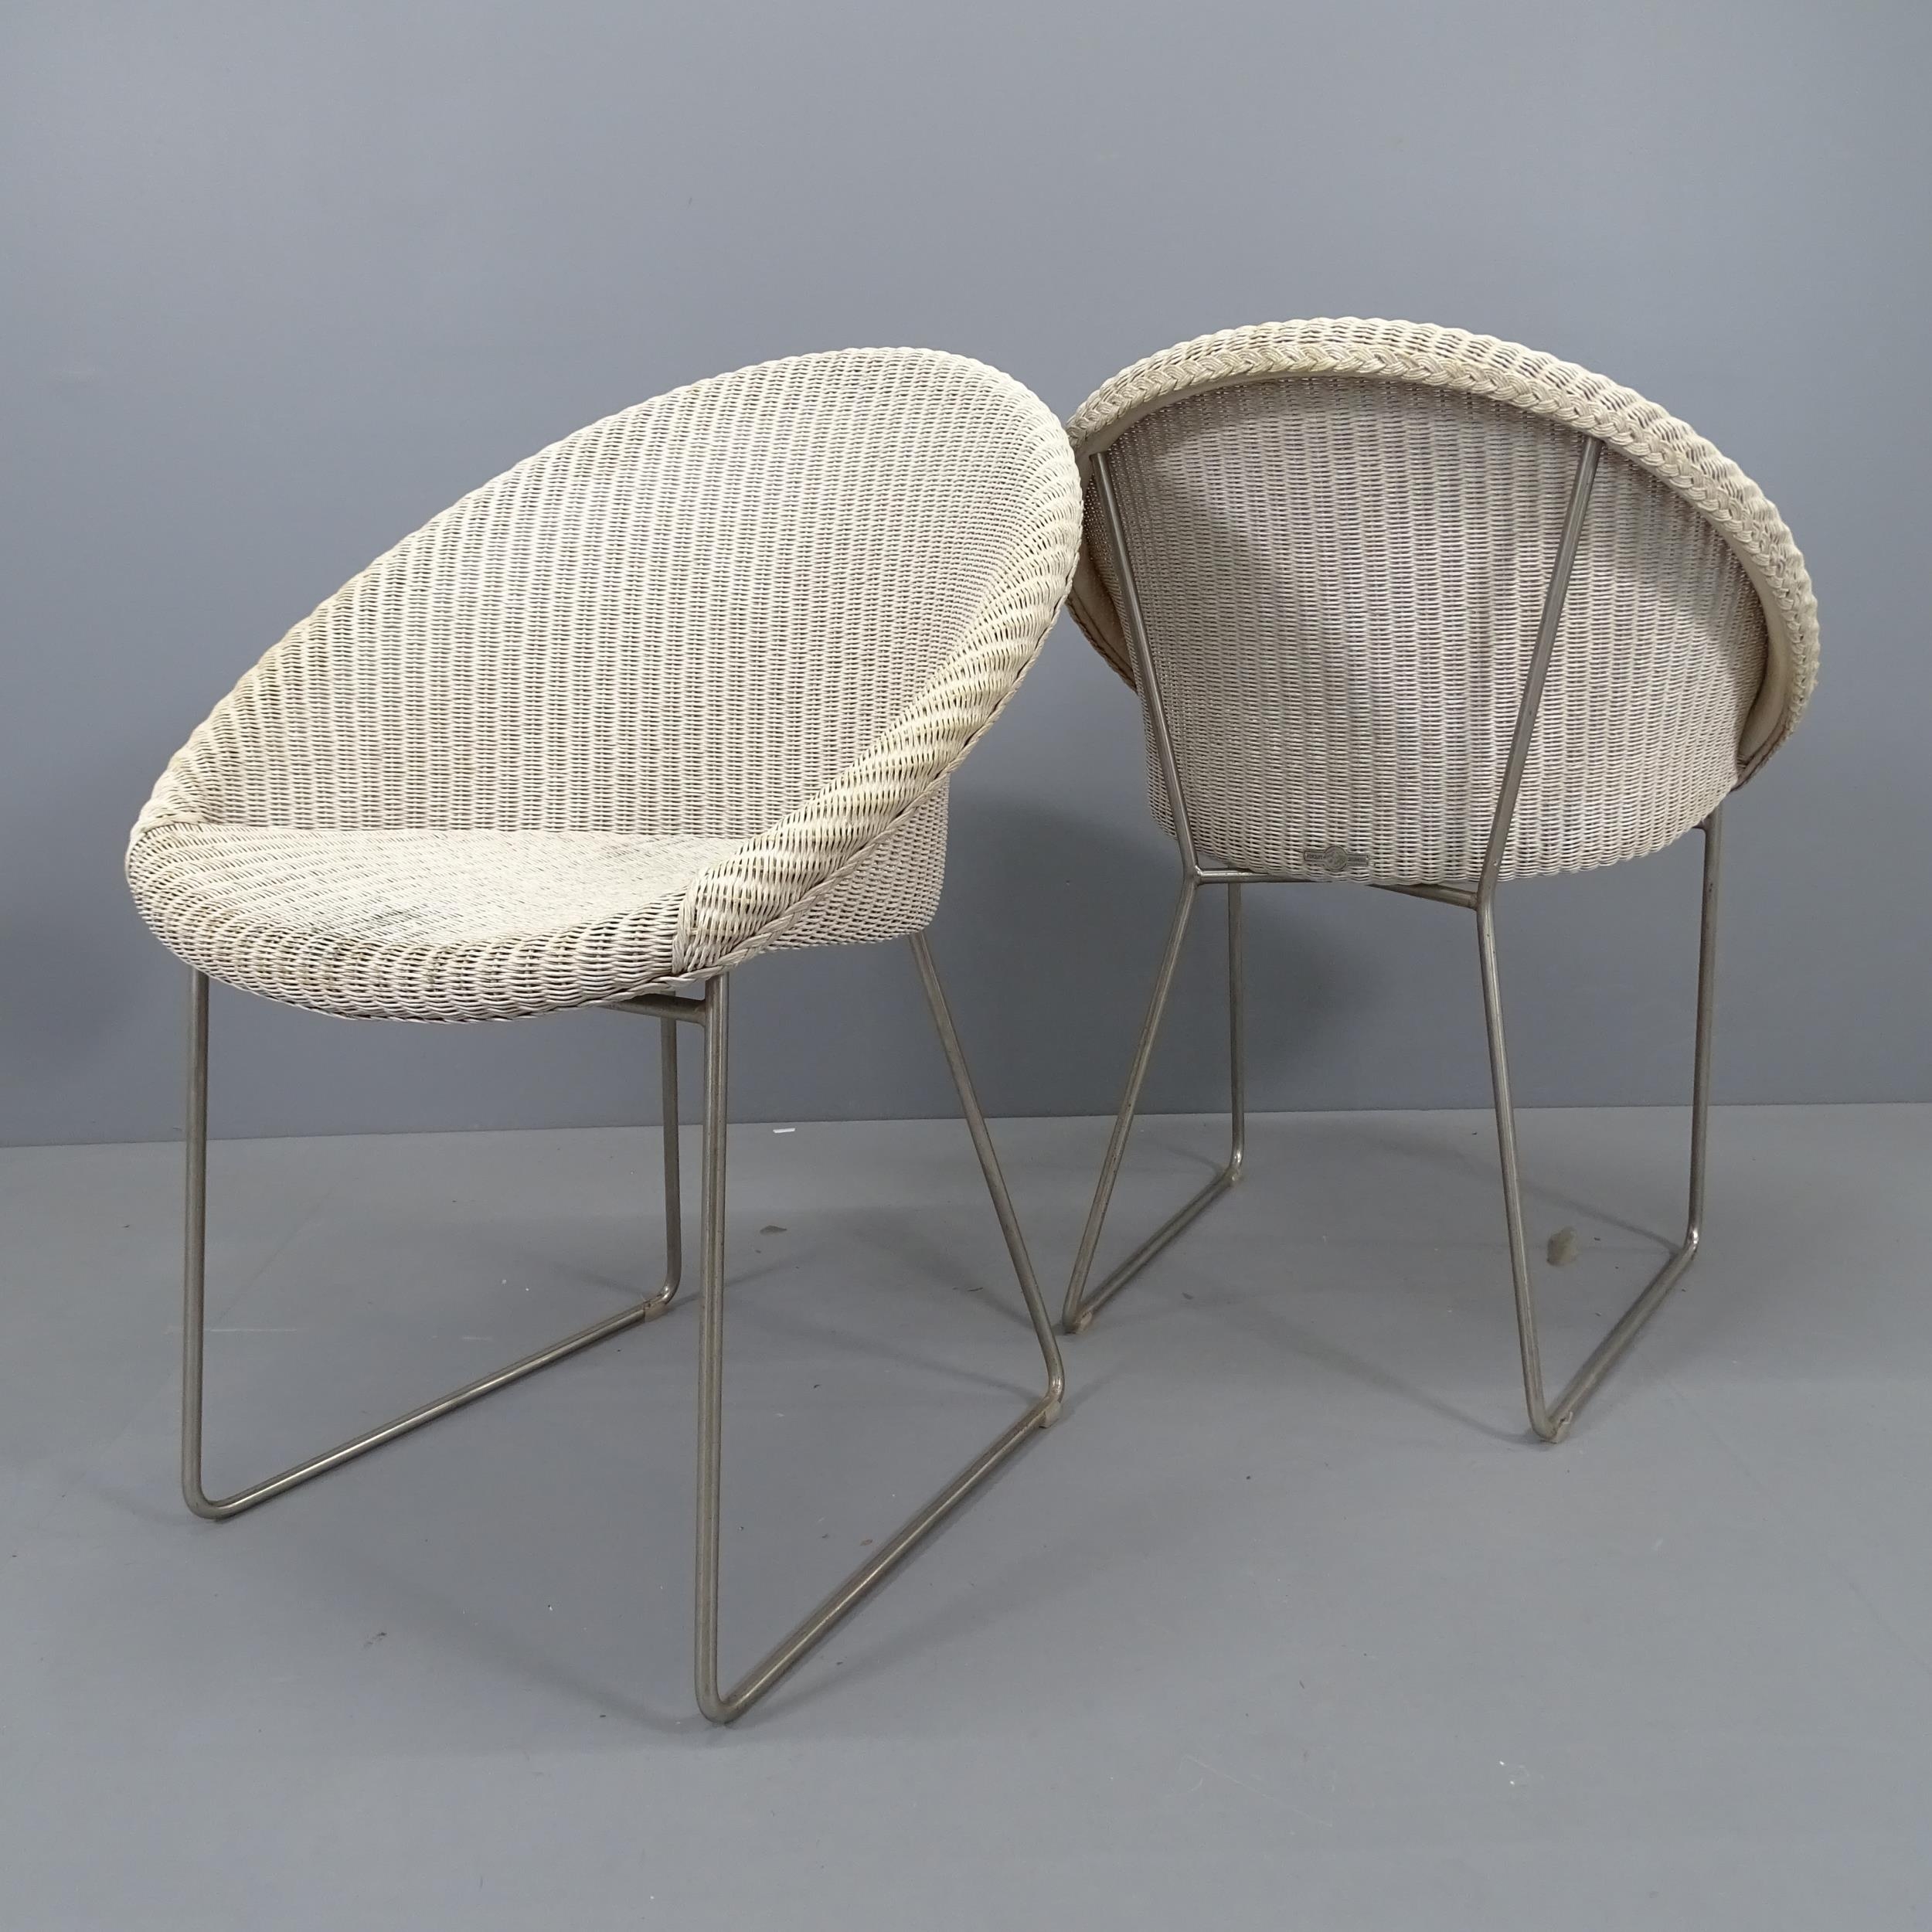 A set of six Vincent Shepperd Gipsy wicker dining chairs on stainless steel sled base. RRP £495 - Image 3 of 3